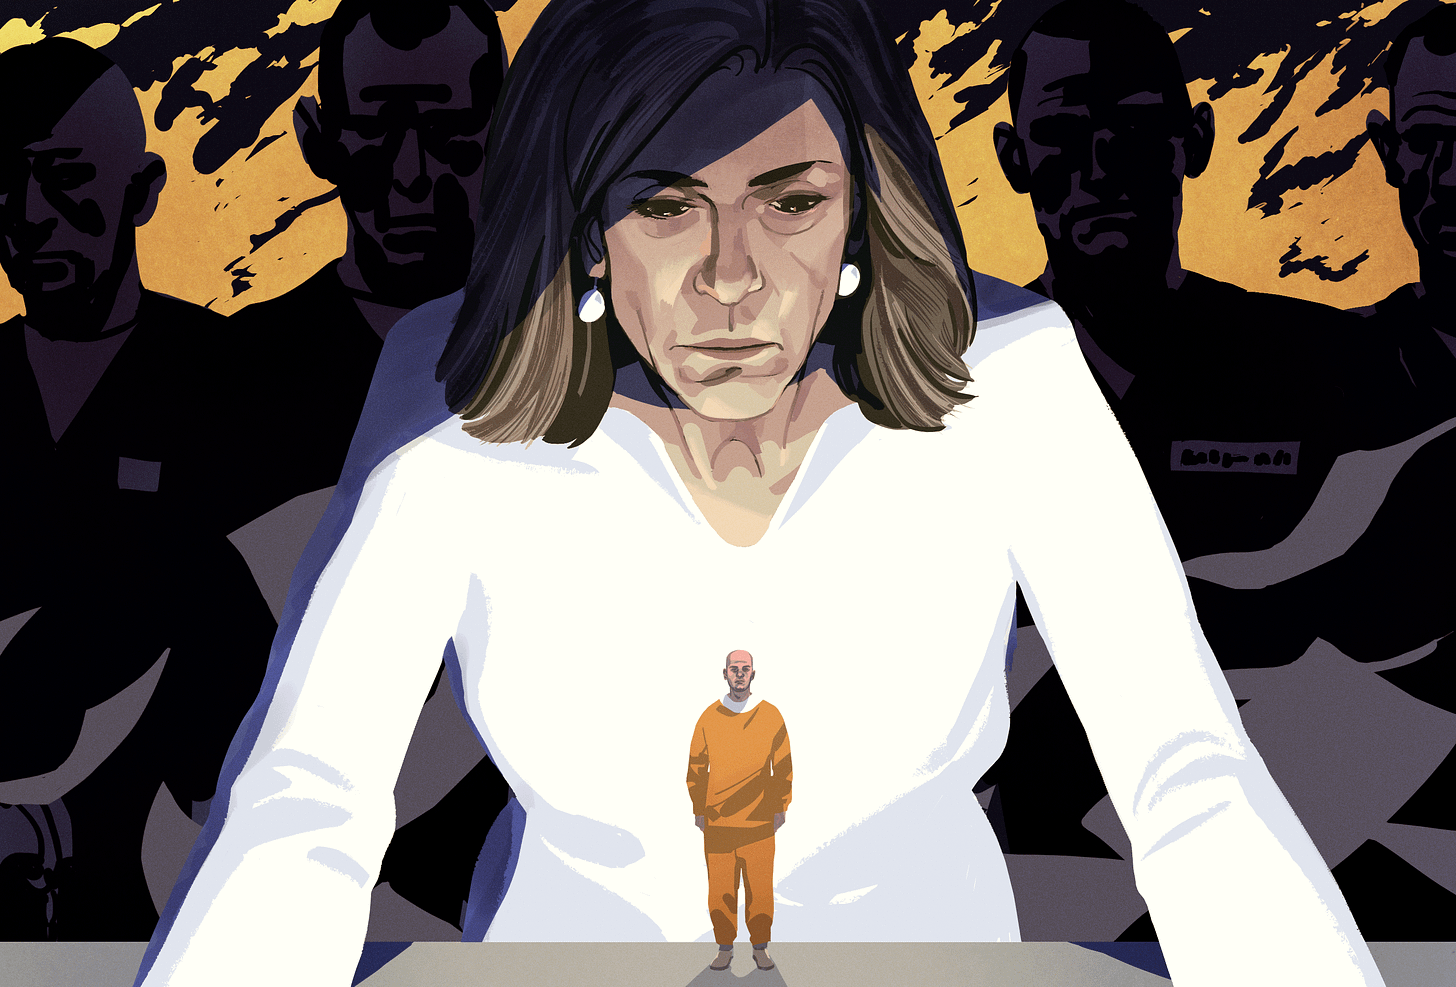 Illustration of Kelly Siegler and Jeff Prible by Patrick Leger for The Intercept